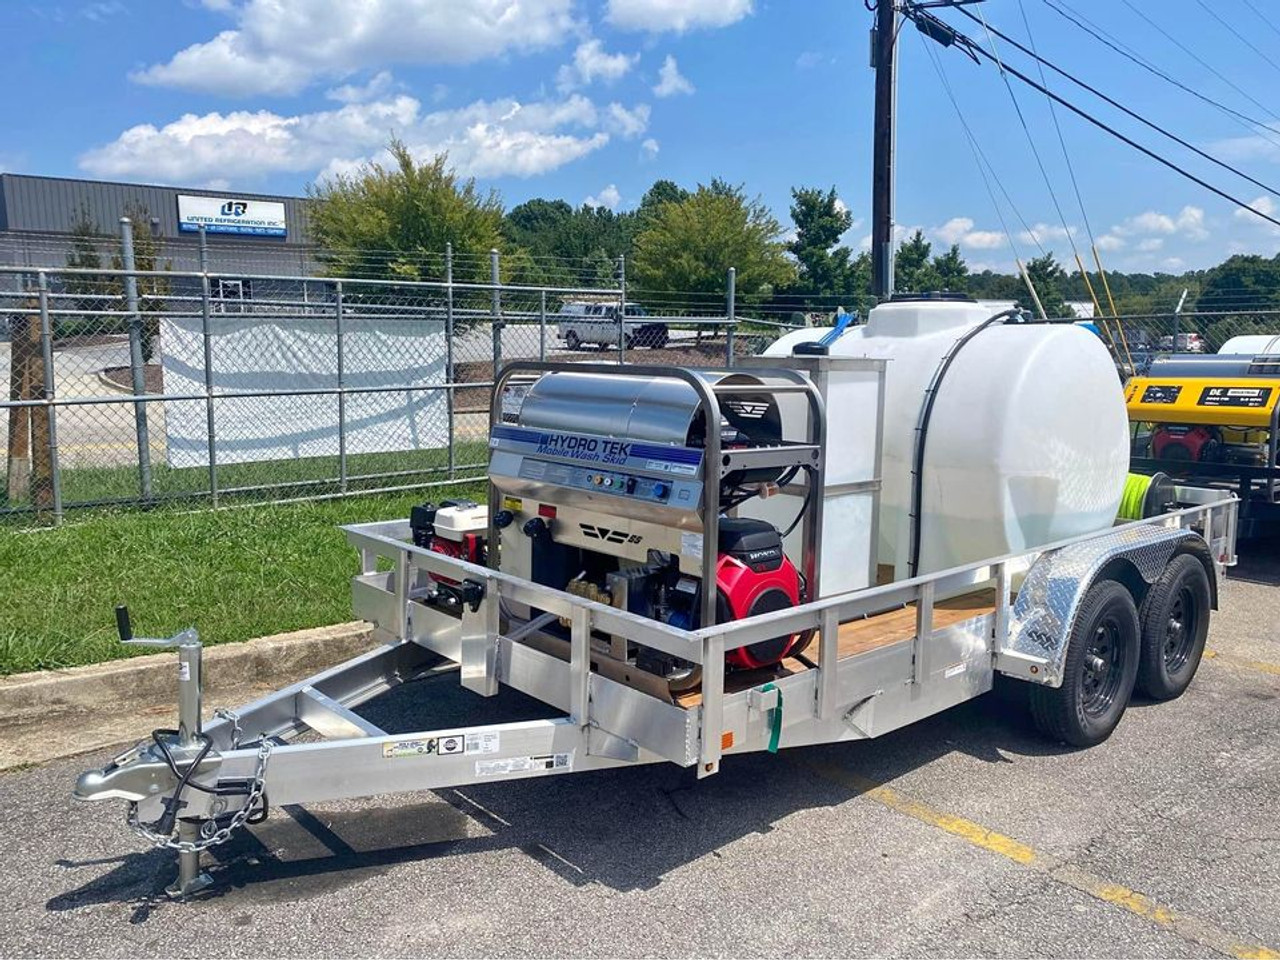 Aluminum hot water pressure washing trailer for sale